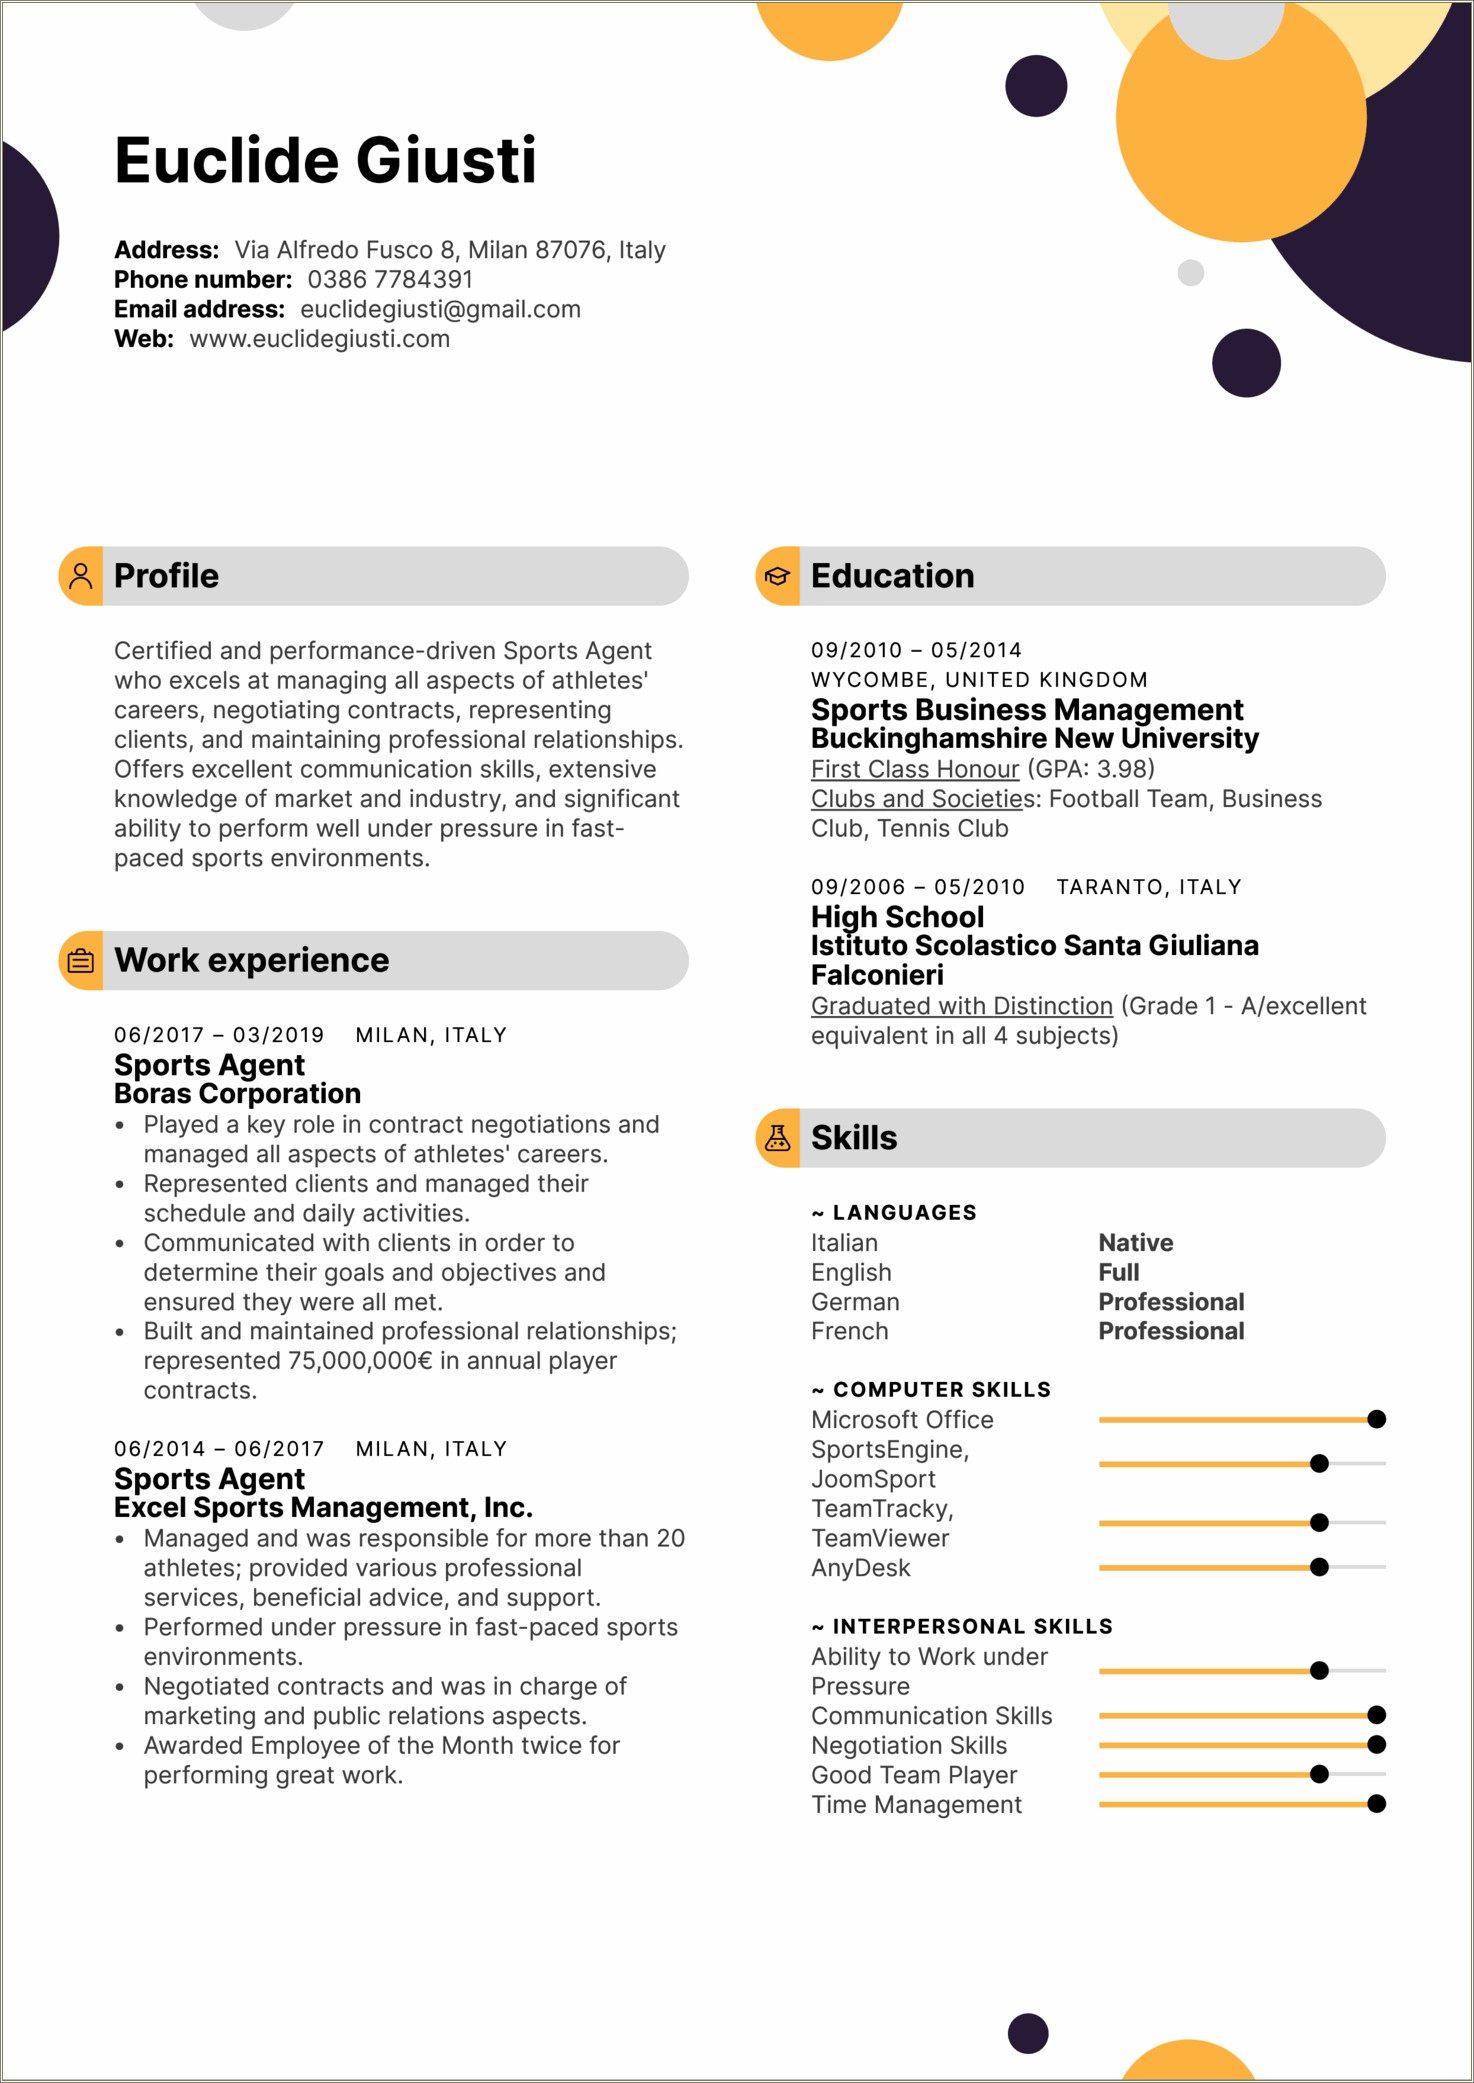 Quick Job Objectives For A Resume Samples